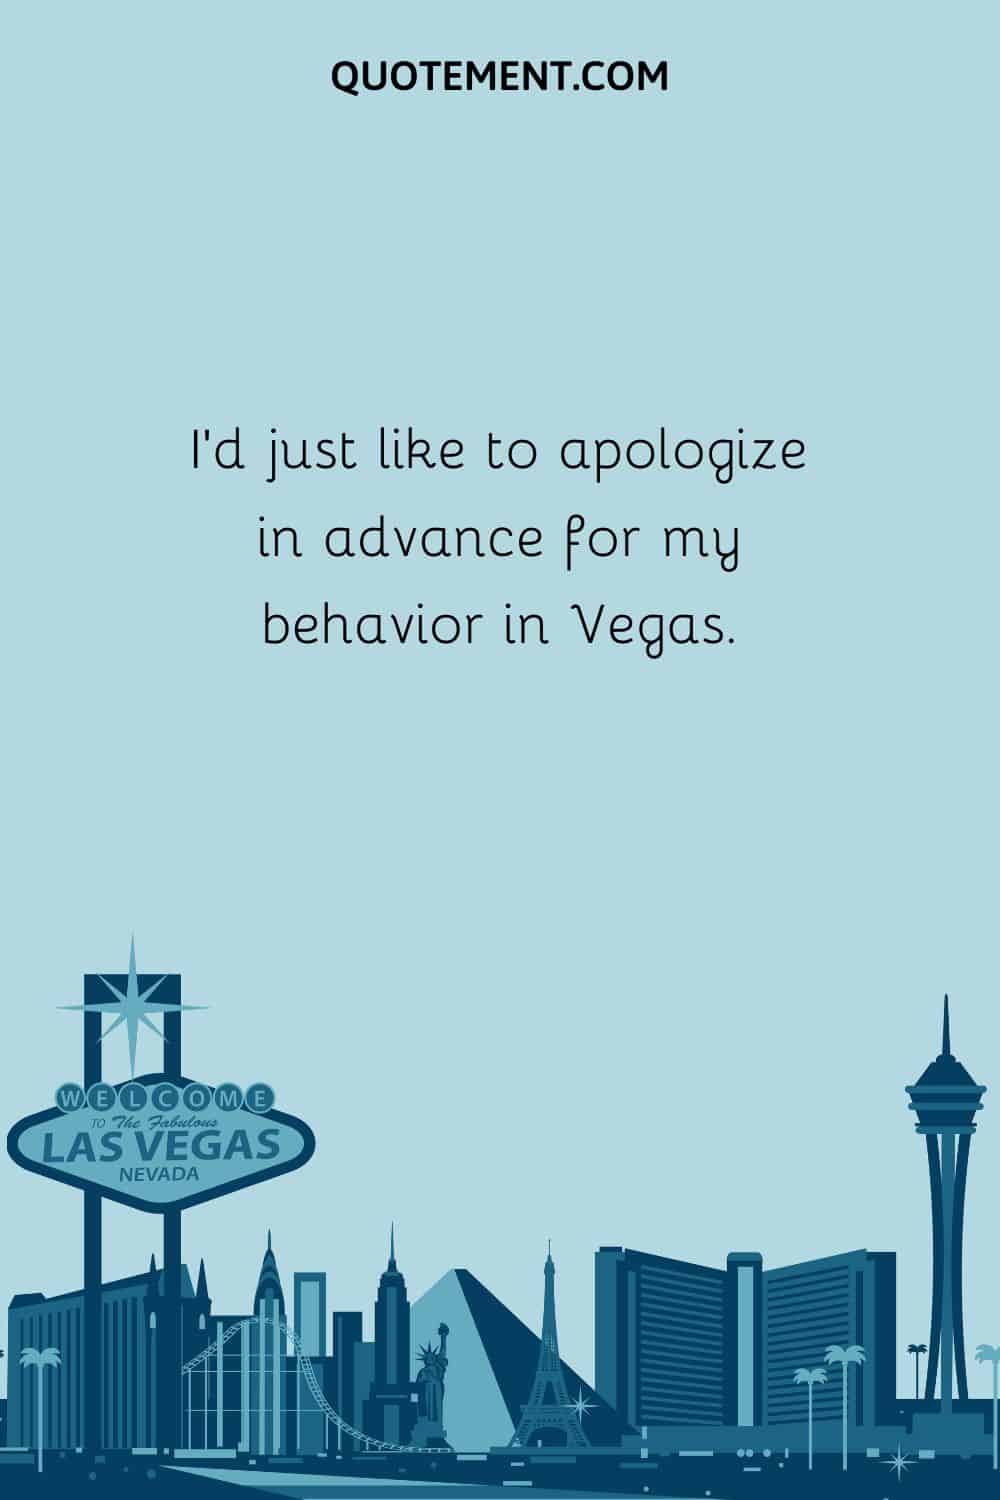 I’d just like to apologize in advance for my behavior in Vegas.